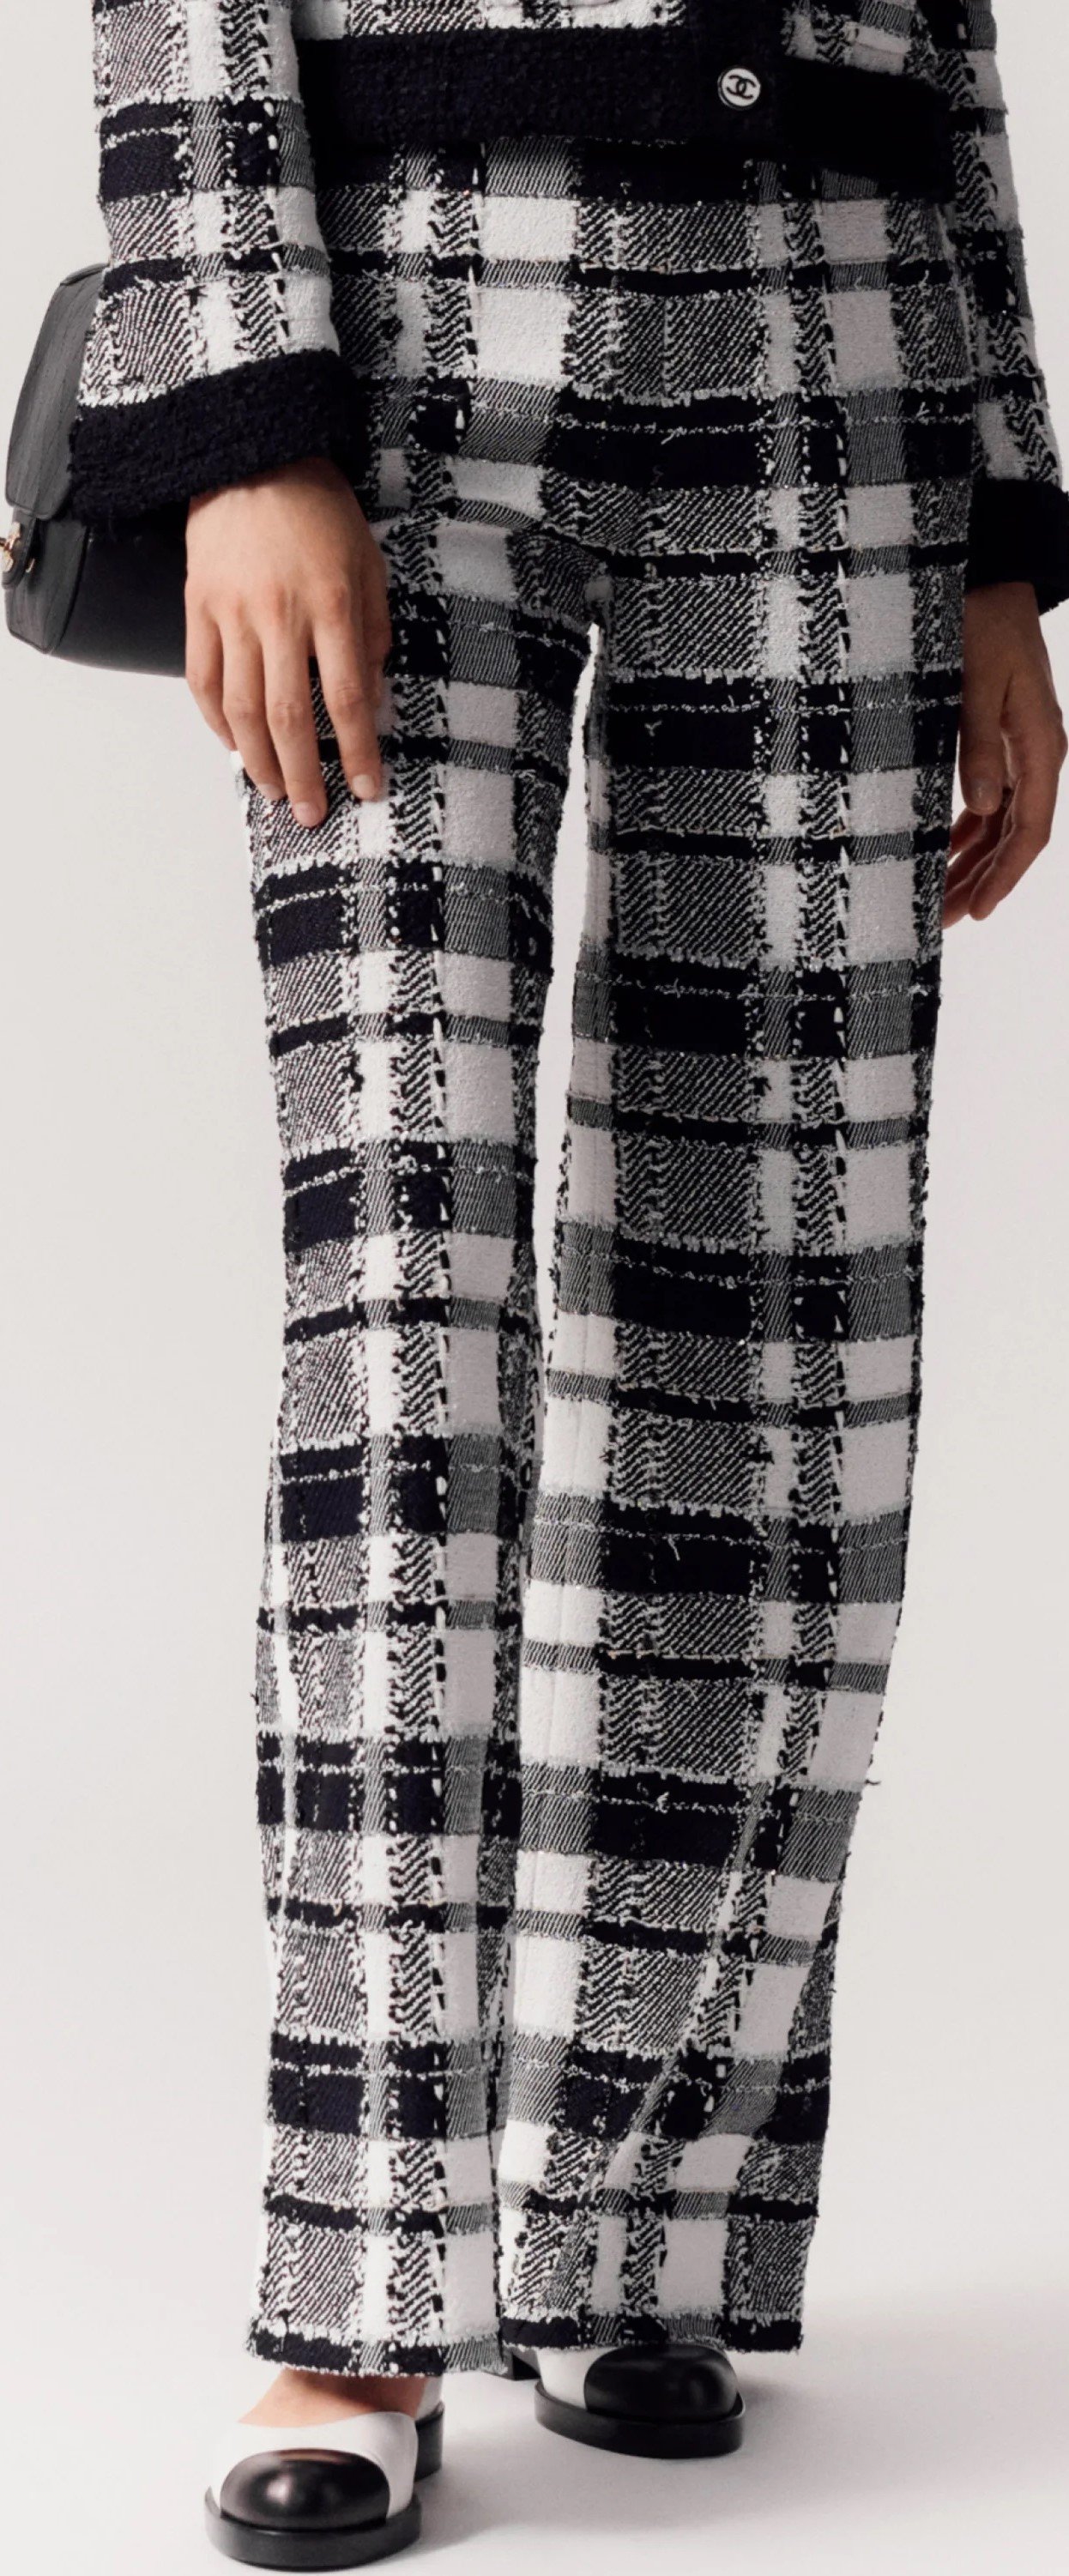 Chanel Tweed Check Trousers in Black, White, Gold & Silver — UFO